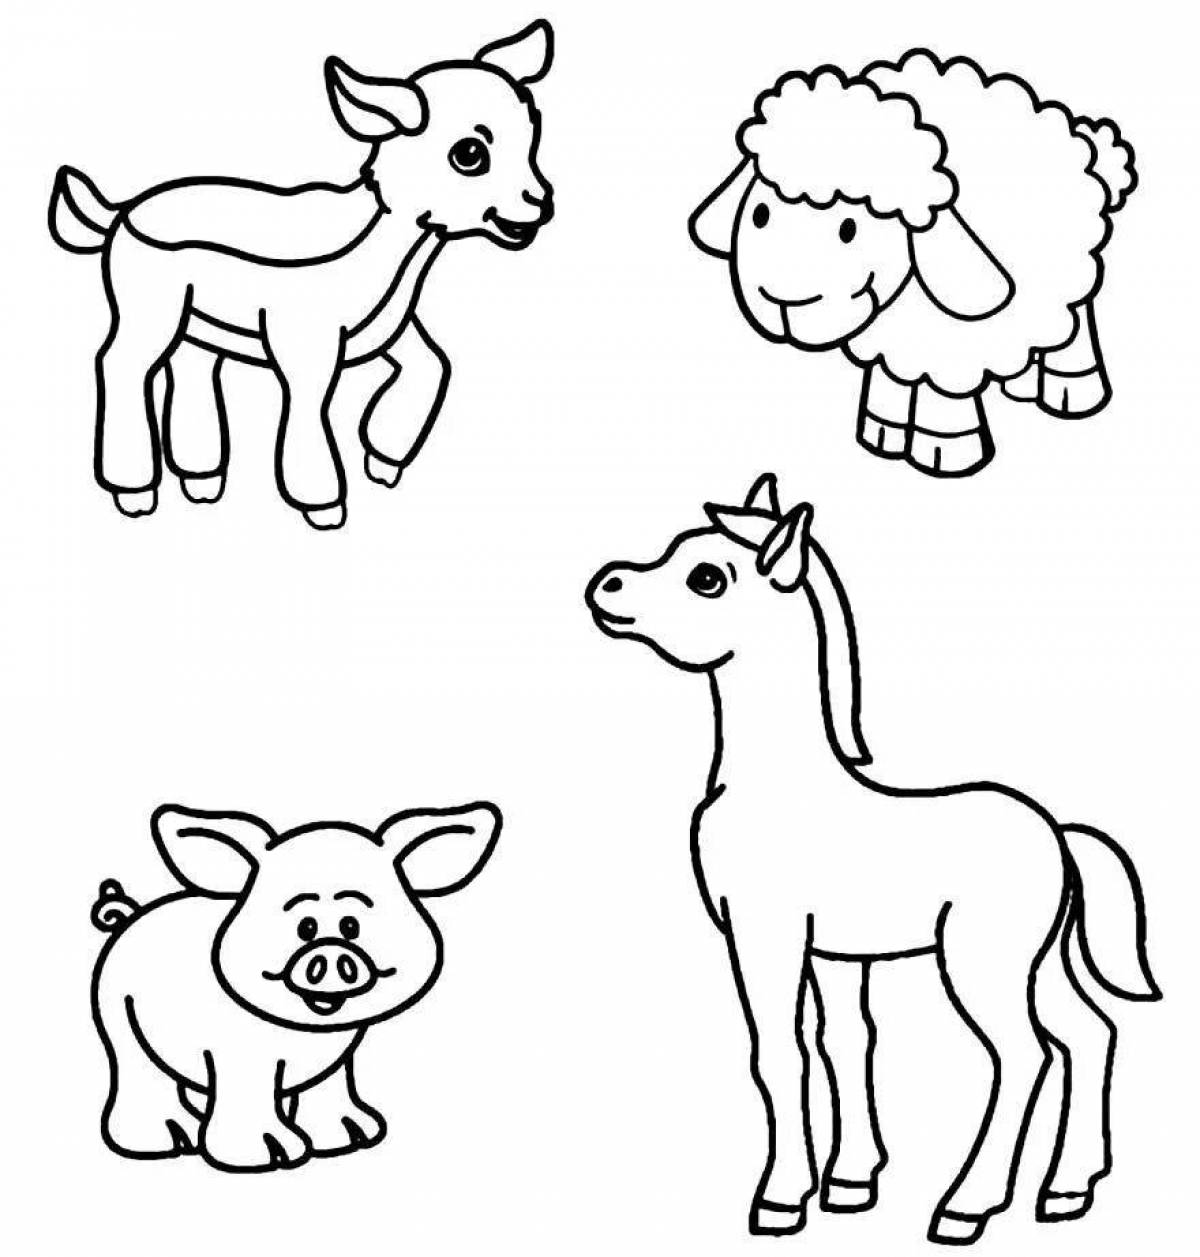 Playful coloring of pets for children 5-6 years old